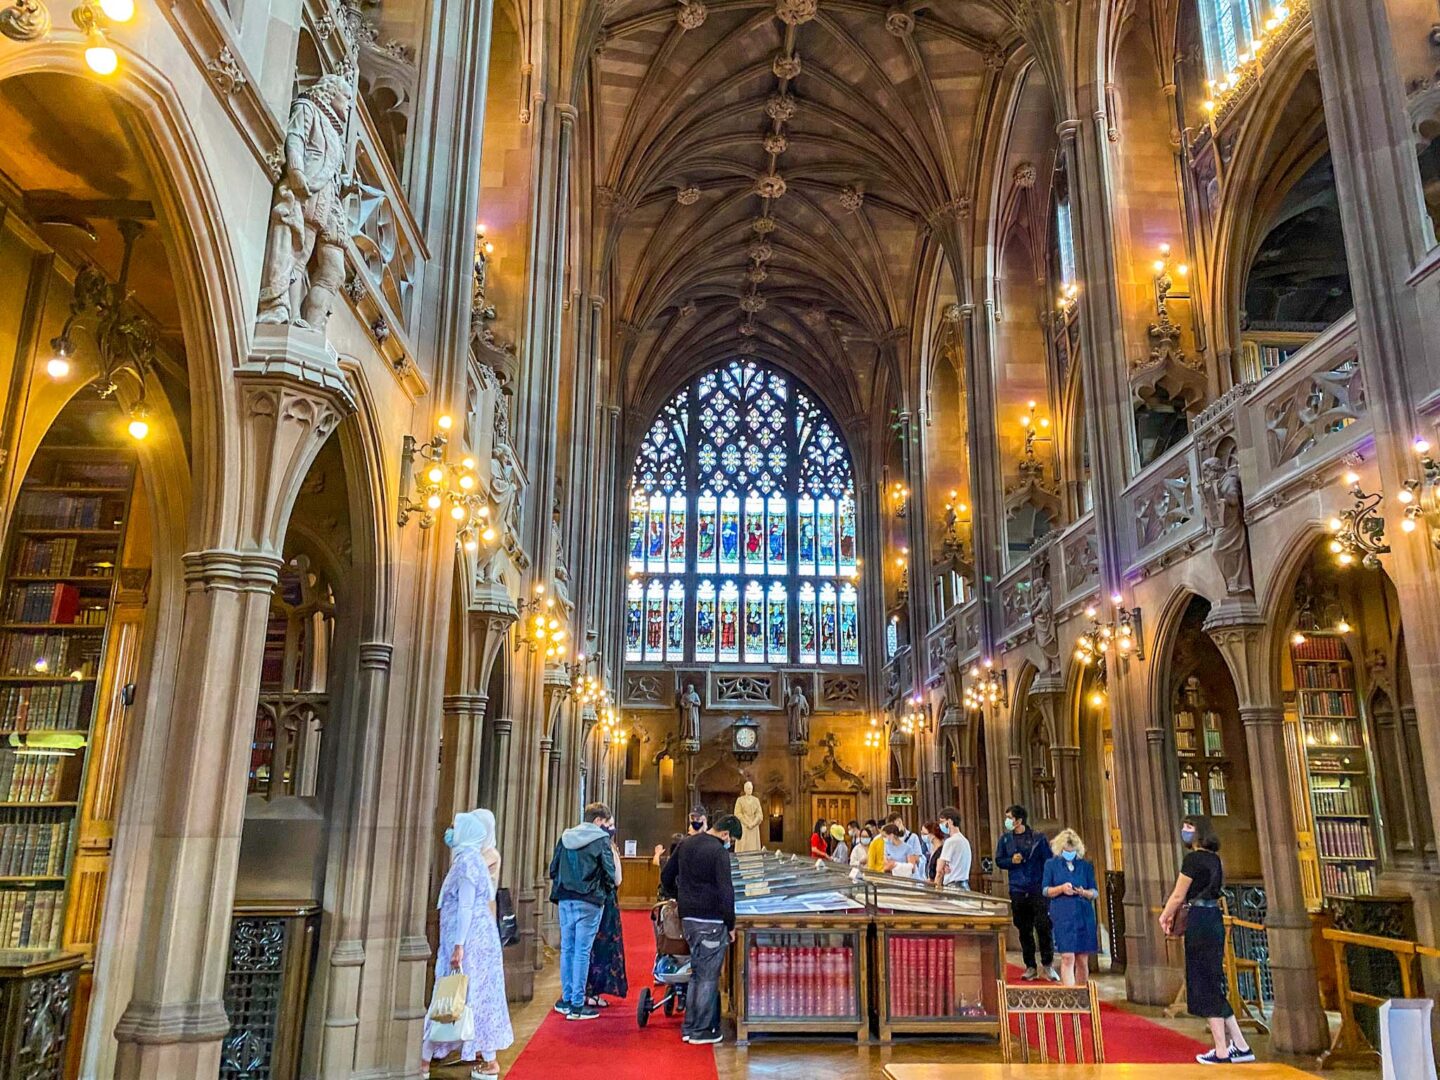 inside John Rylands Library, one day in Manchester